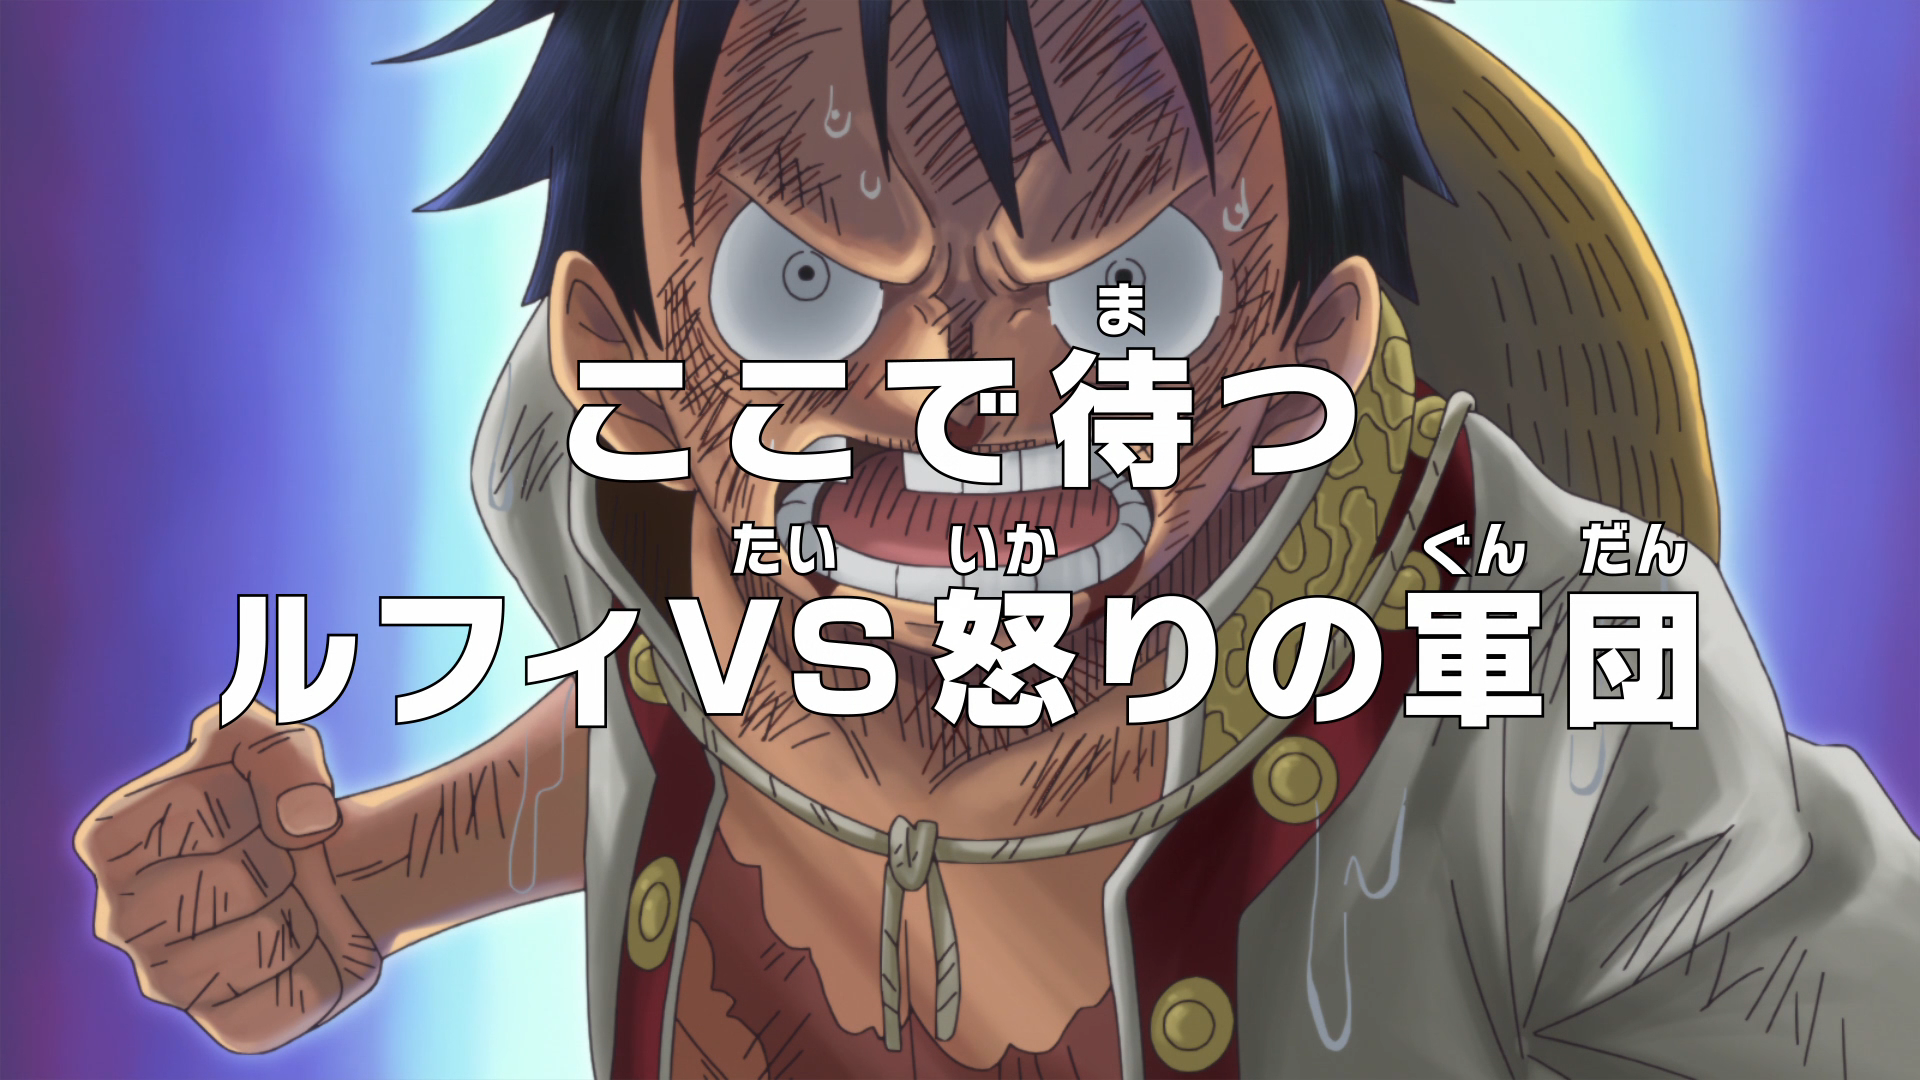 Personal Anime Blog — Nami in episode 853.